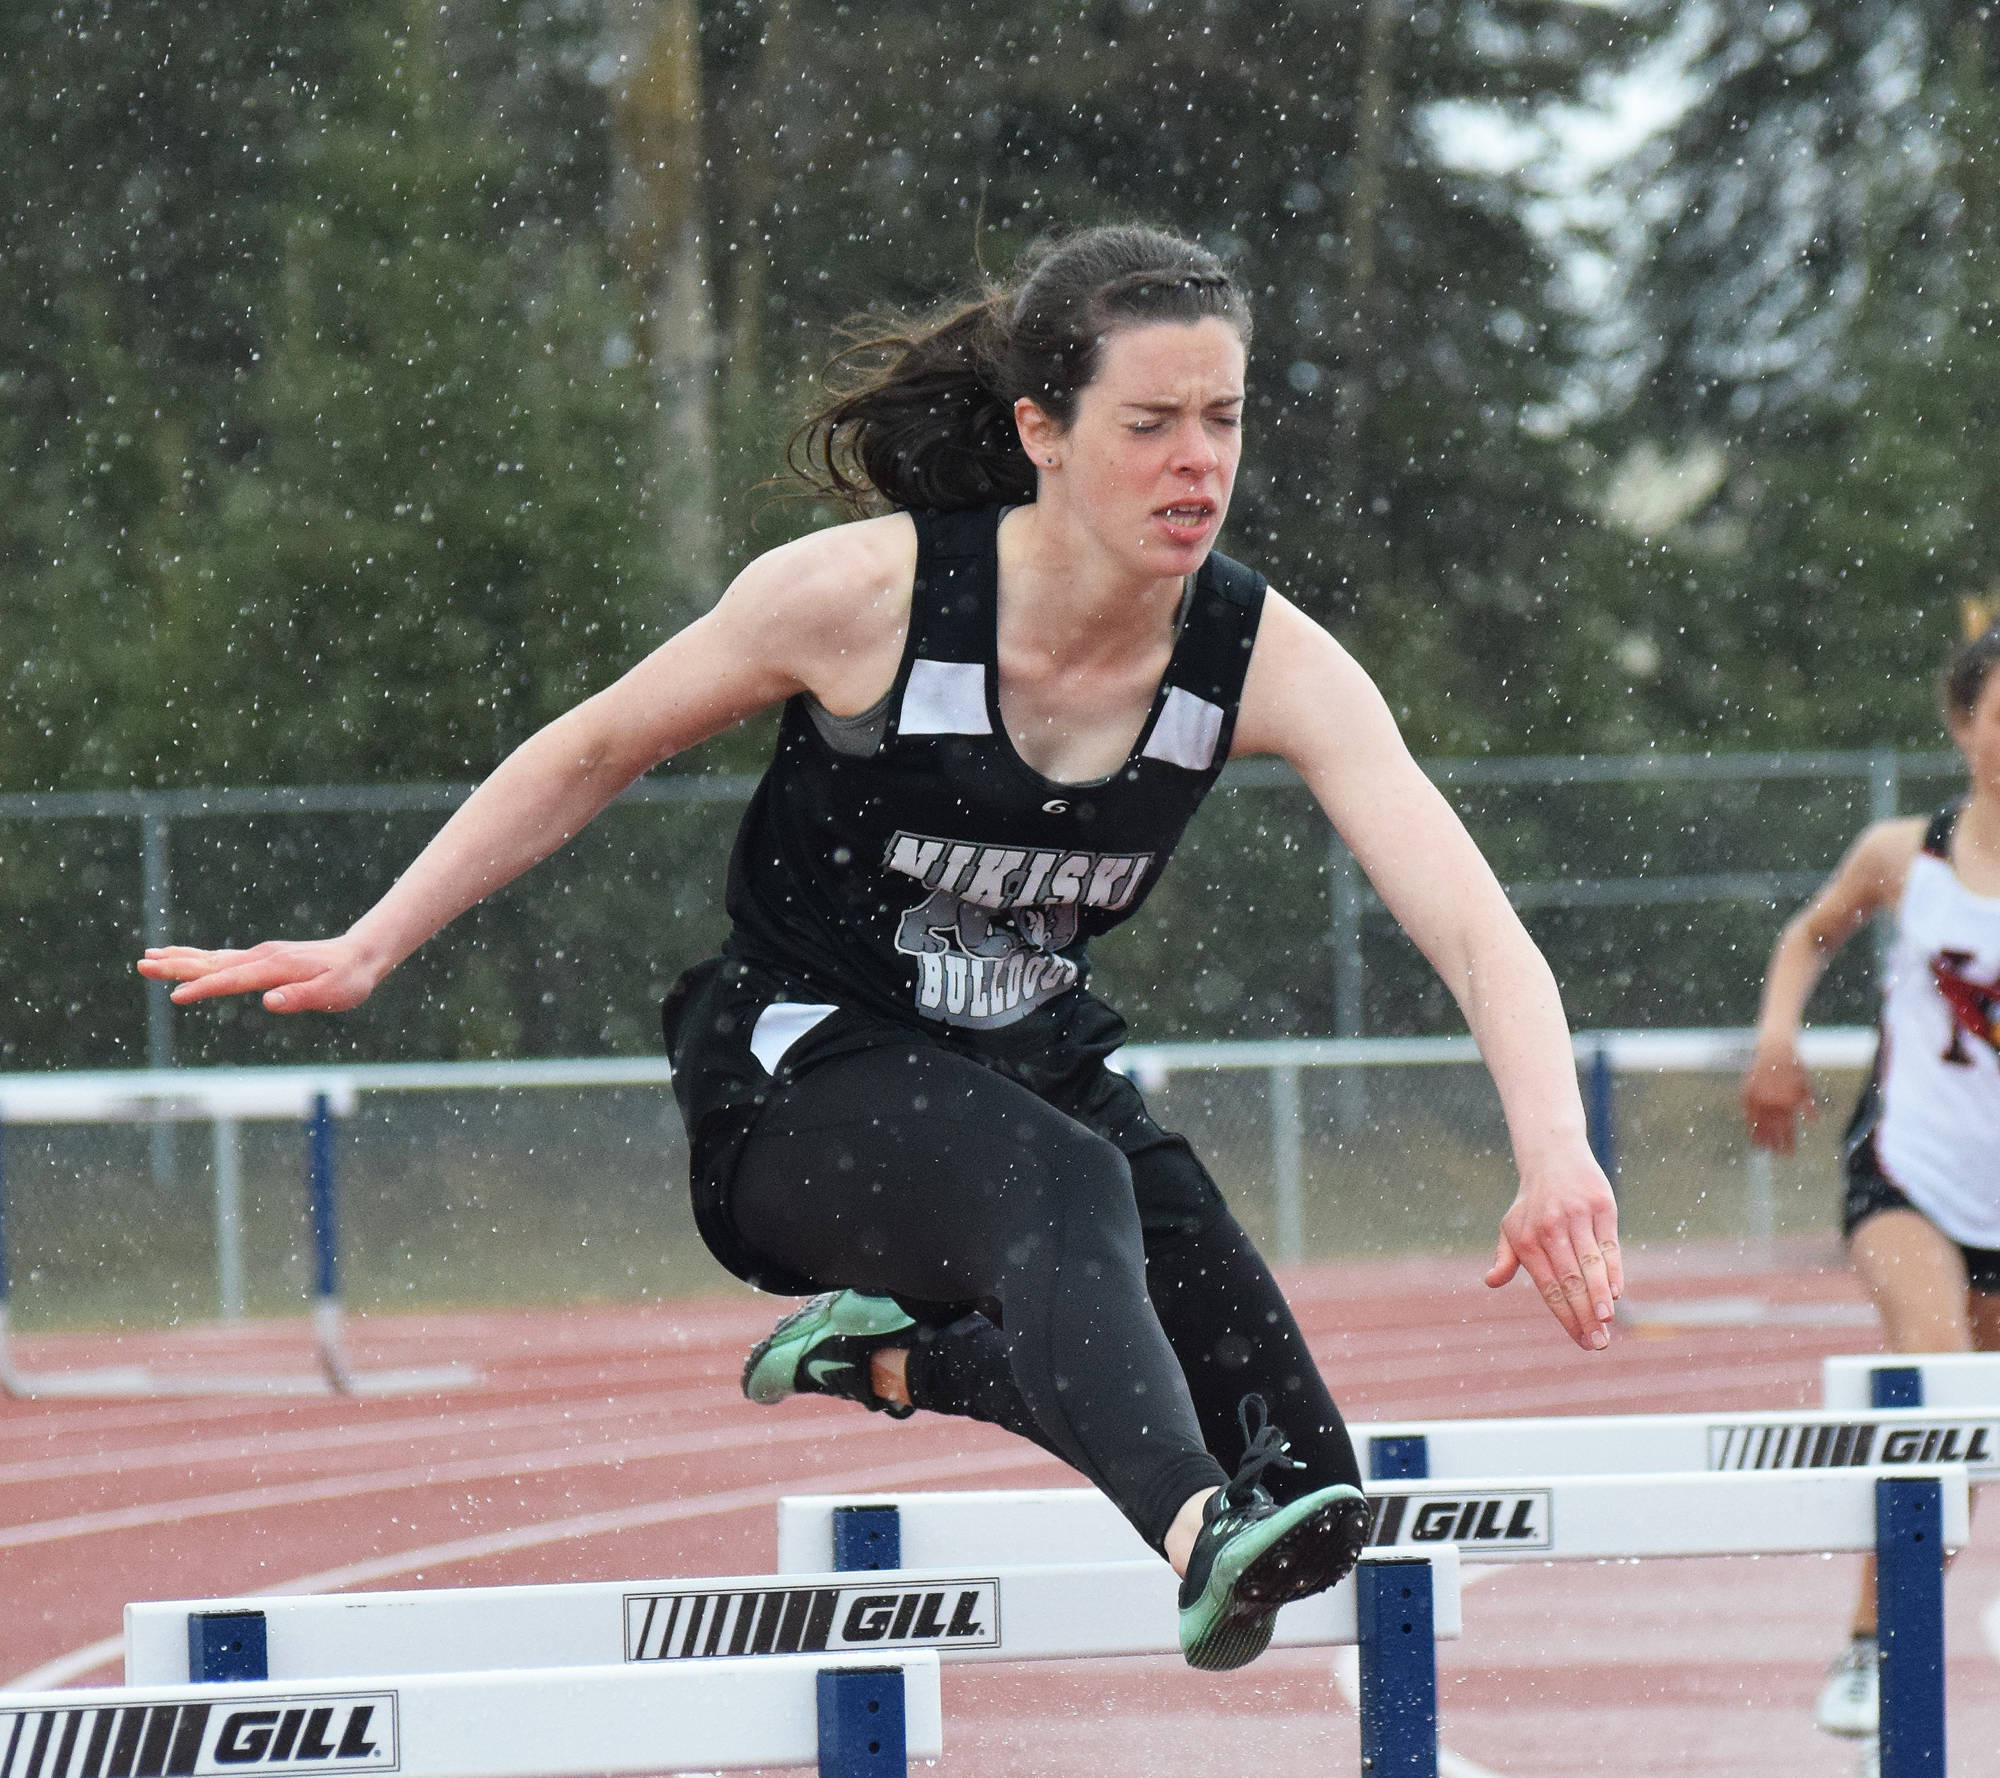 Nikiski senior Crystal Epperheimer leaps a barrier in the girls 300-meter hurdles race Saturday afternoon at the Kenai Peninsula Borough track and field championships at Justin Maile Field in Soldotna. (Photo by Joey Klecka/Peninsula Clarion)